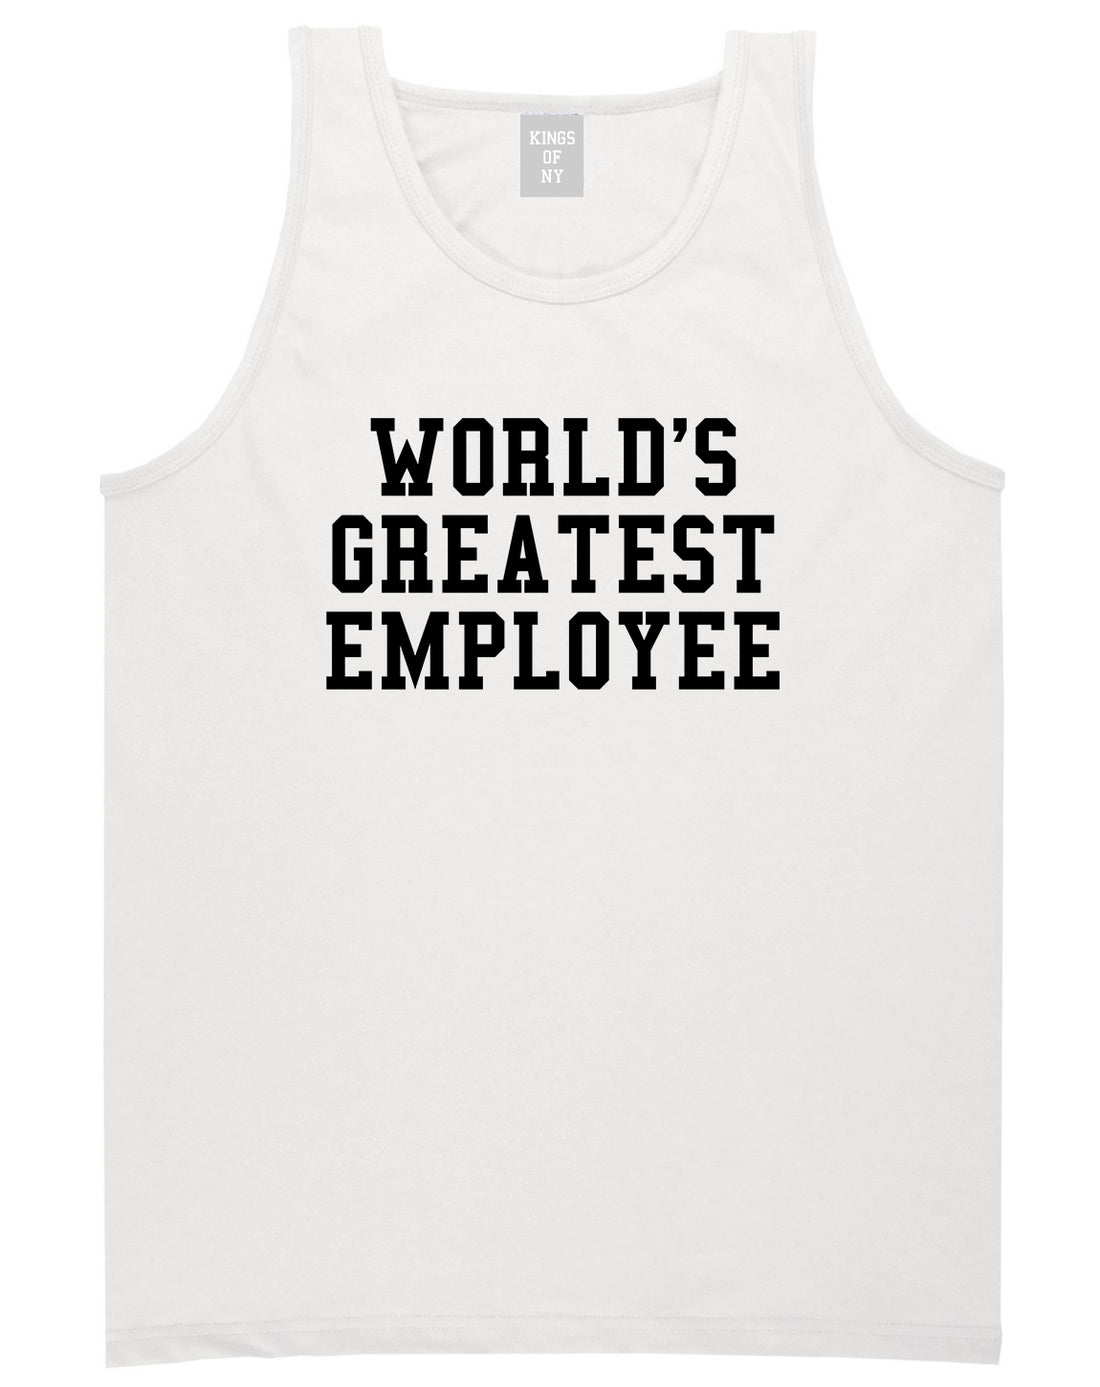 Worlds Greatest Employee Funny Christmas Mens Tank Top T-Shirt White